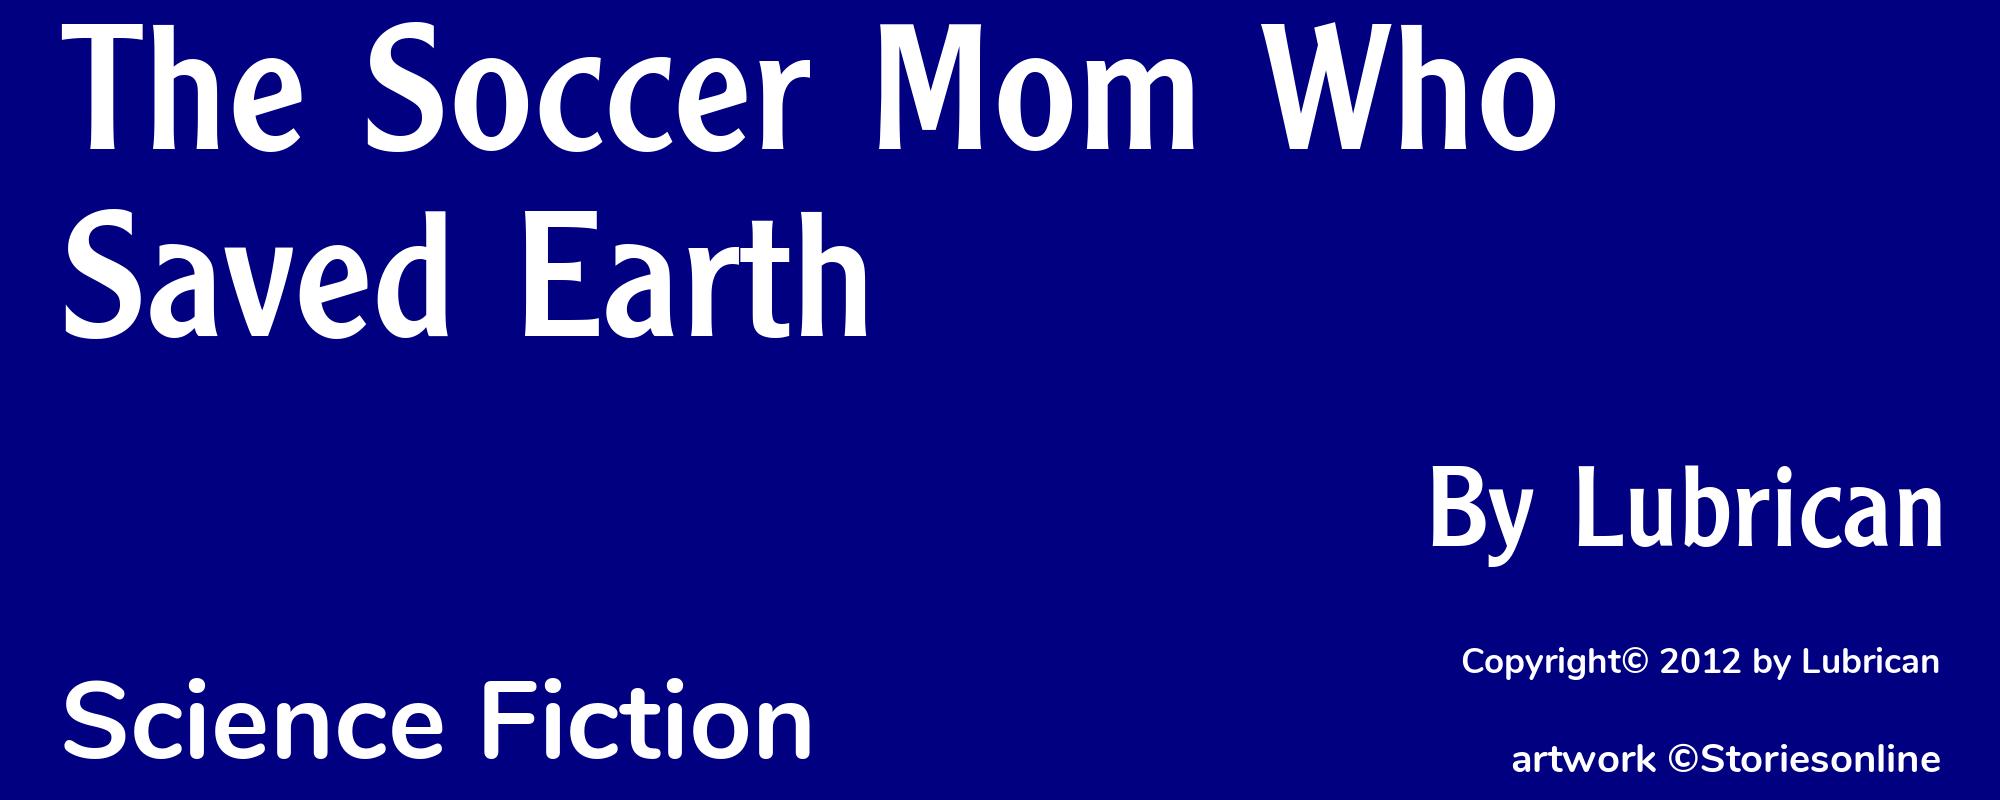 The Soccer Mom Who Saved Earth - Cover